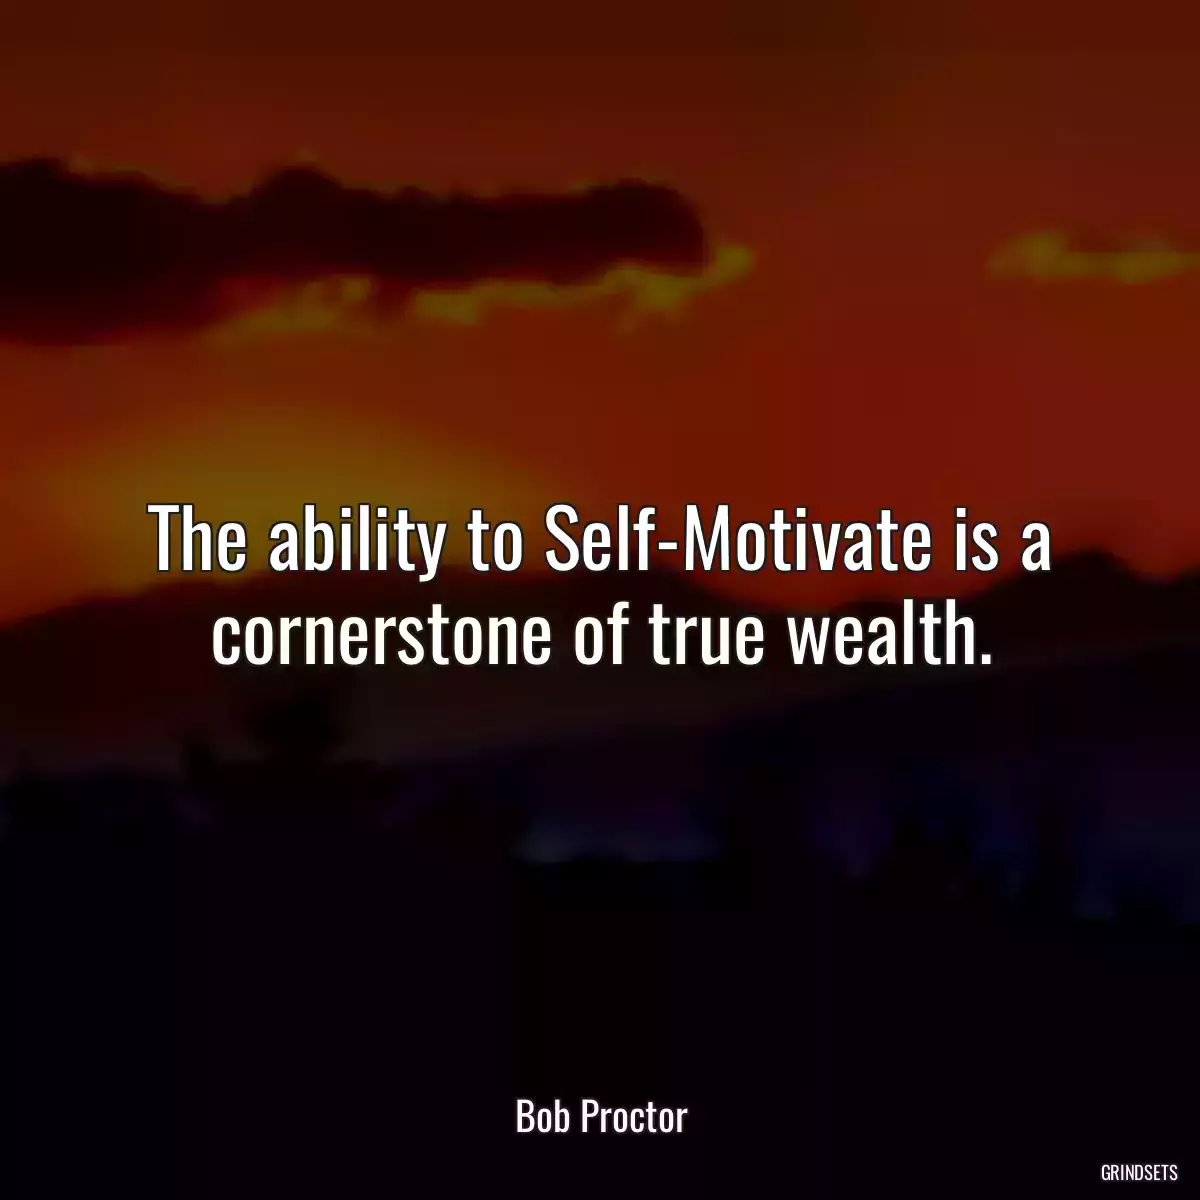 The ability to Self-Motivate is a cornerstone of true wealth.